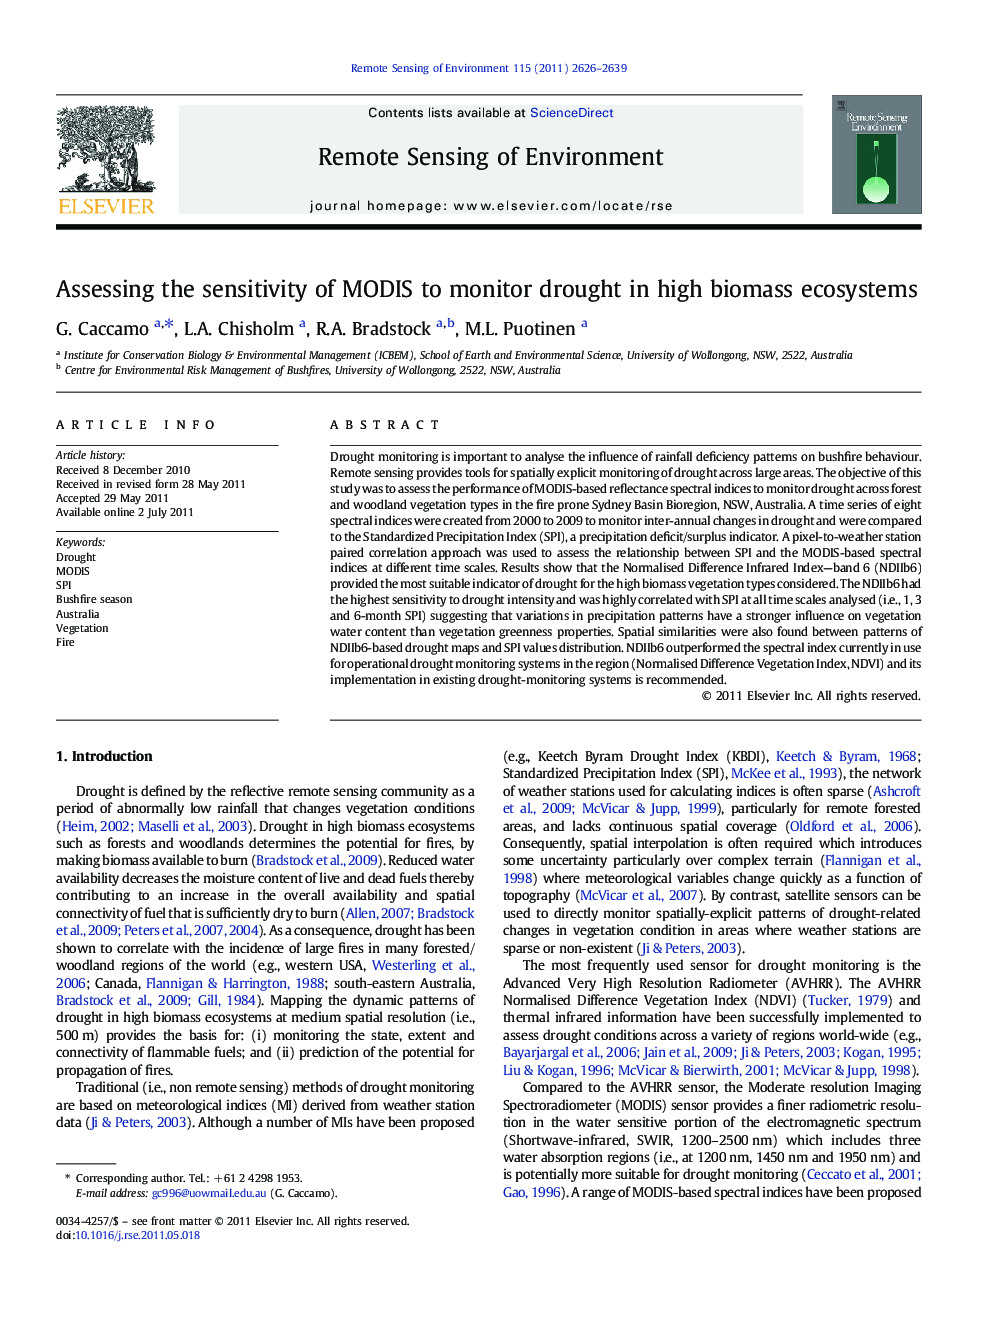 Assessing the sensitivity of MODIS to monitor drought in high biomass ecosystems